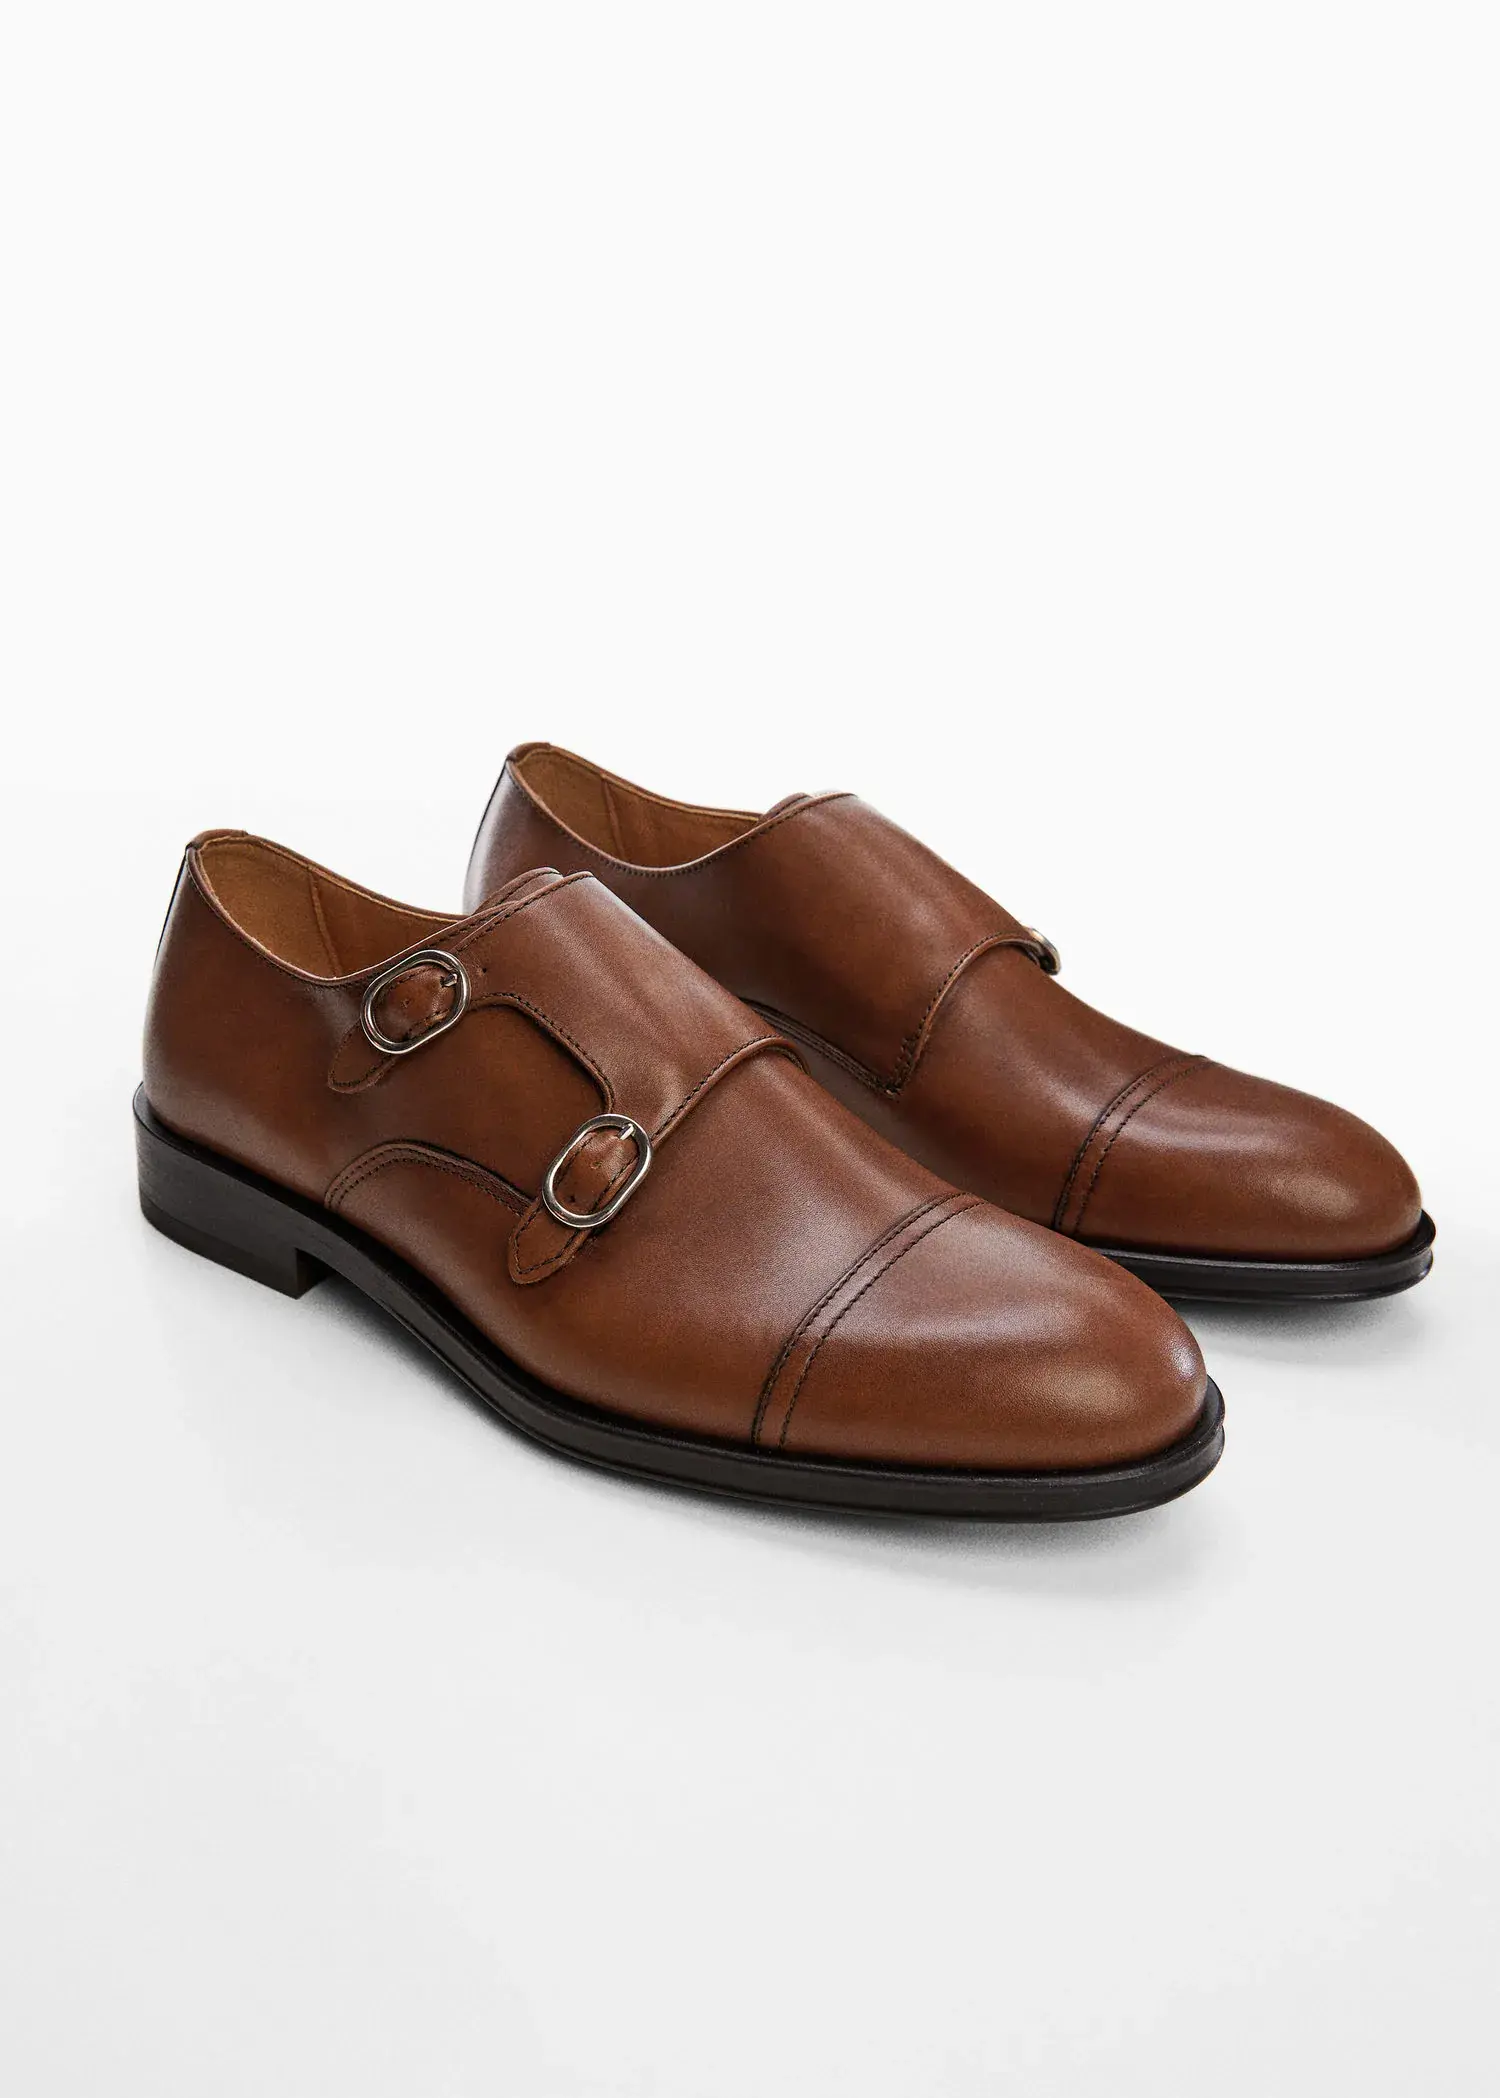 Mango Monk shoes with leather buckle. a pair of brown shoes on top of a white surface. 